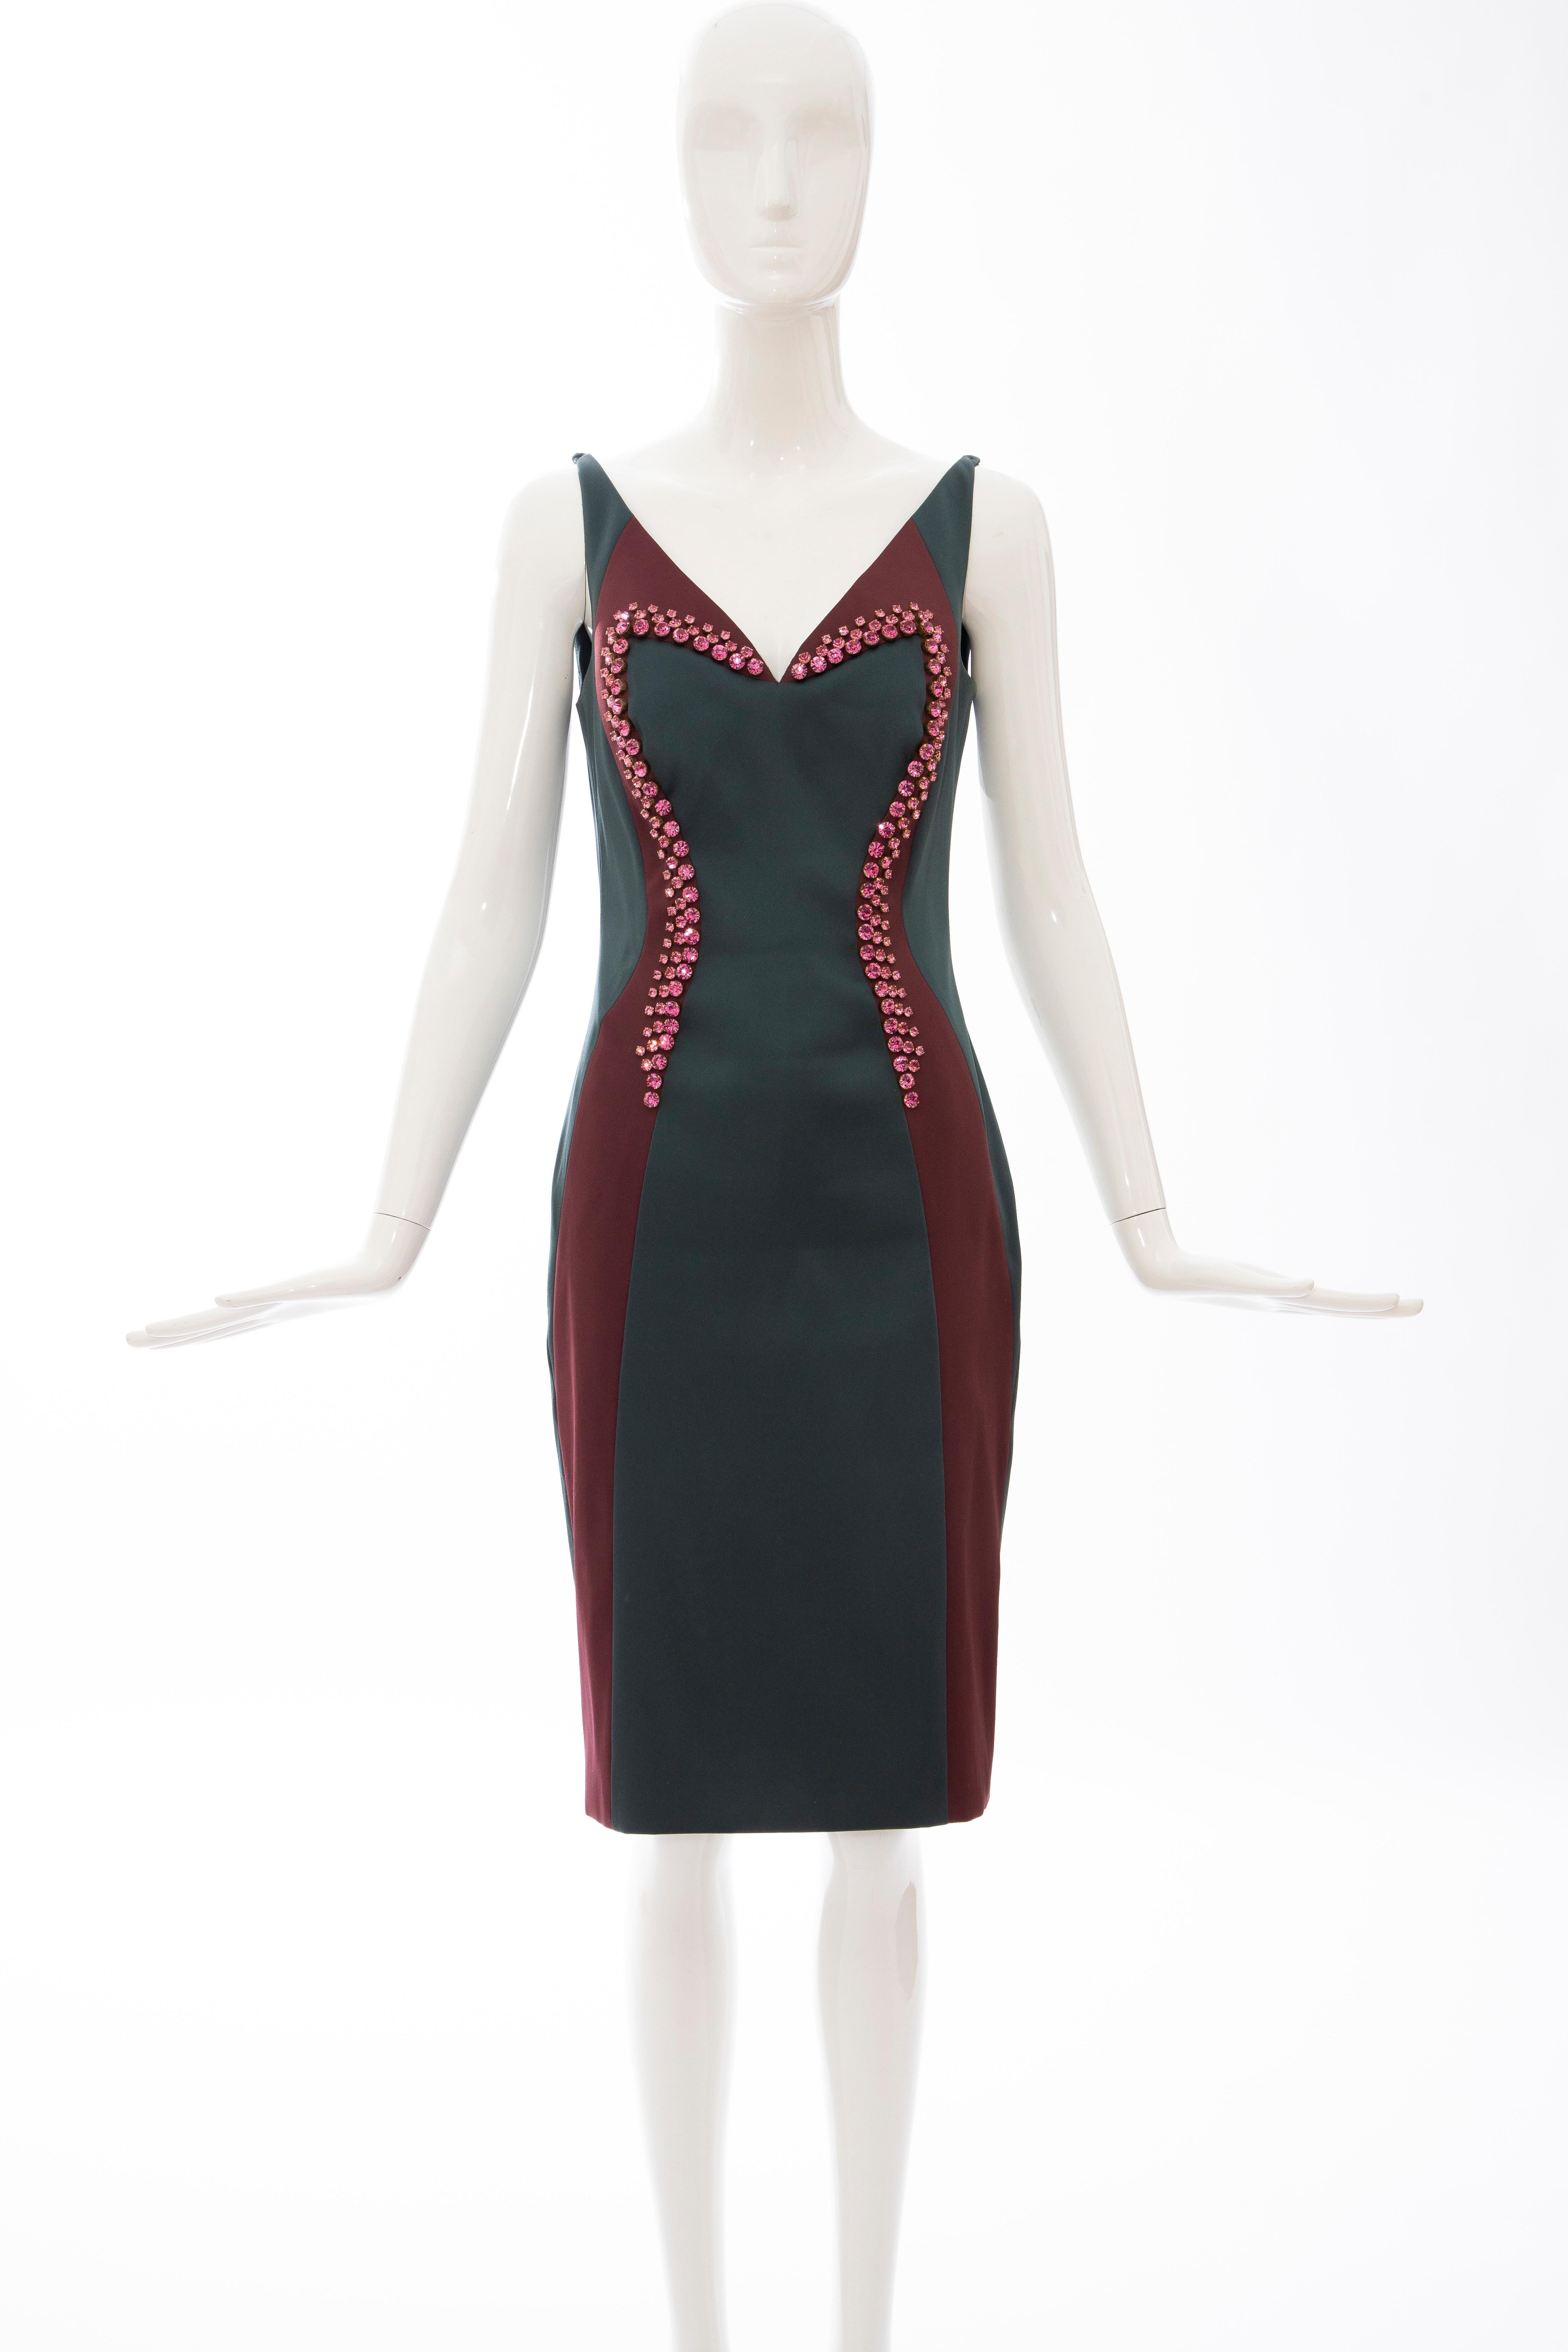 Prada, Spring 2012 silk satin sleeveless dress with sweetheart neckline, hand-sewn Swarovski crystal embellishment at front and concealed zip closure at back. 

IT. 42, US. 6

Bust: 30, Waist: 24, Hip: 32, Length: 39.5

Fabric: 89% Polyester, 8%